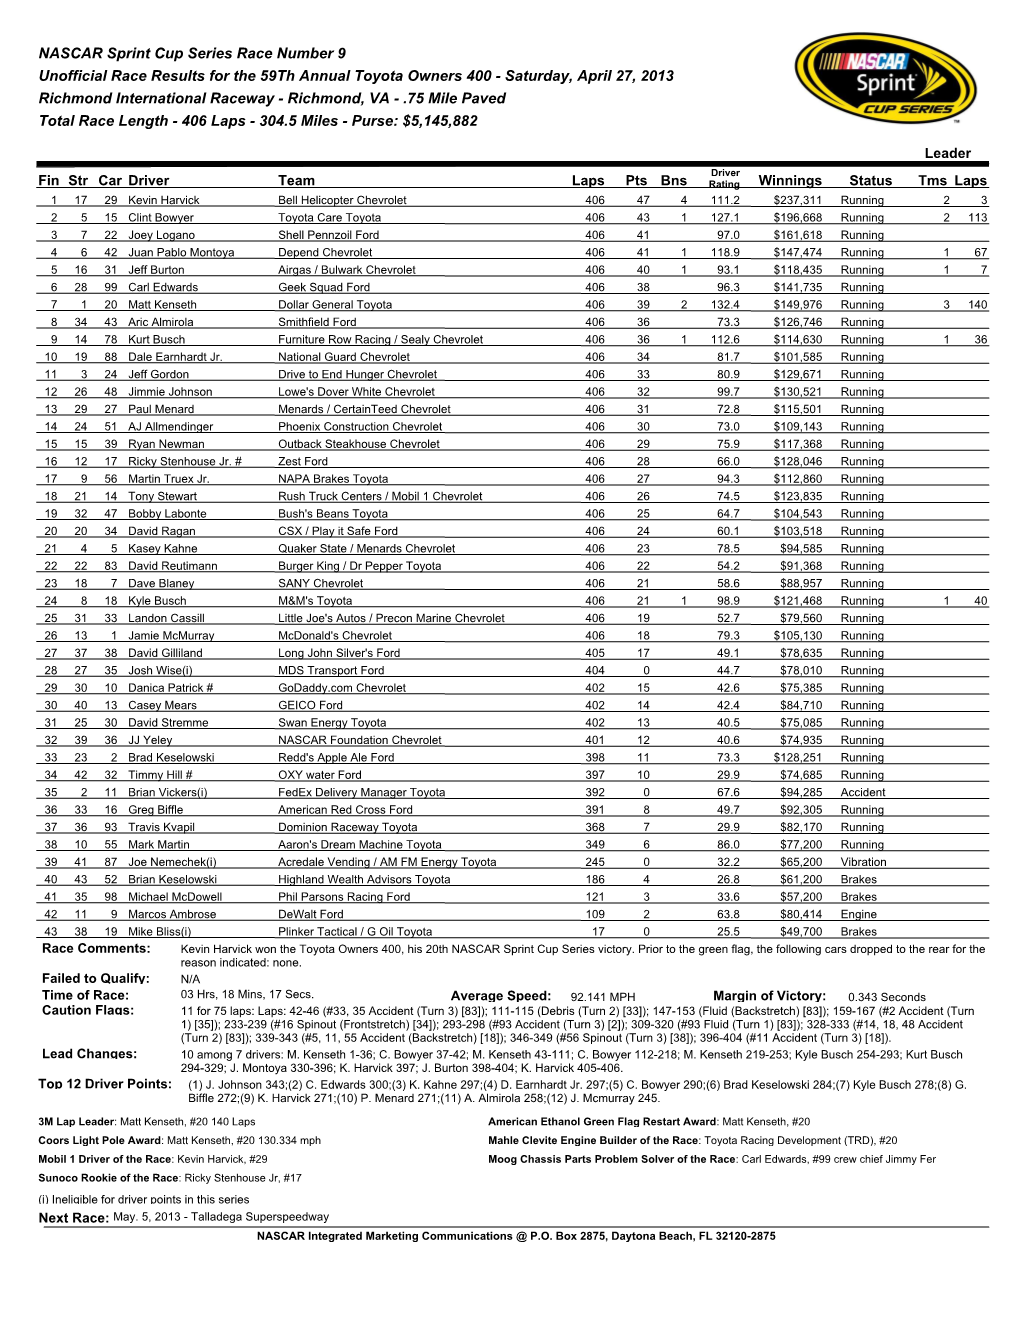 NASCAR Sprint Cup Series Race Number 9 Unofficial Race Results